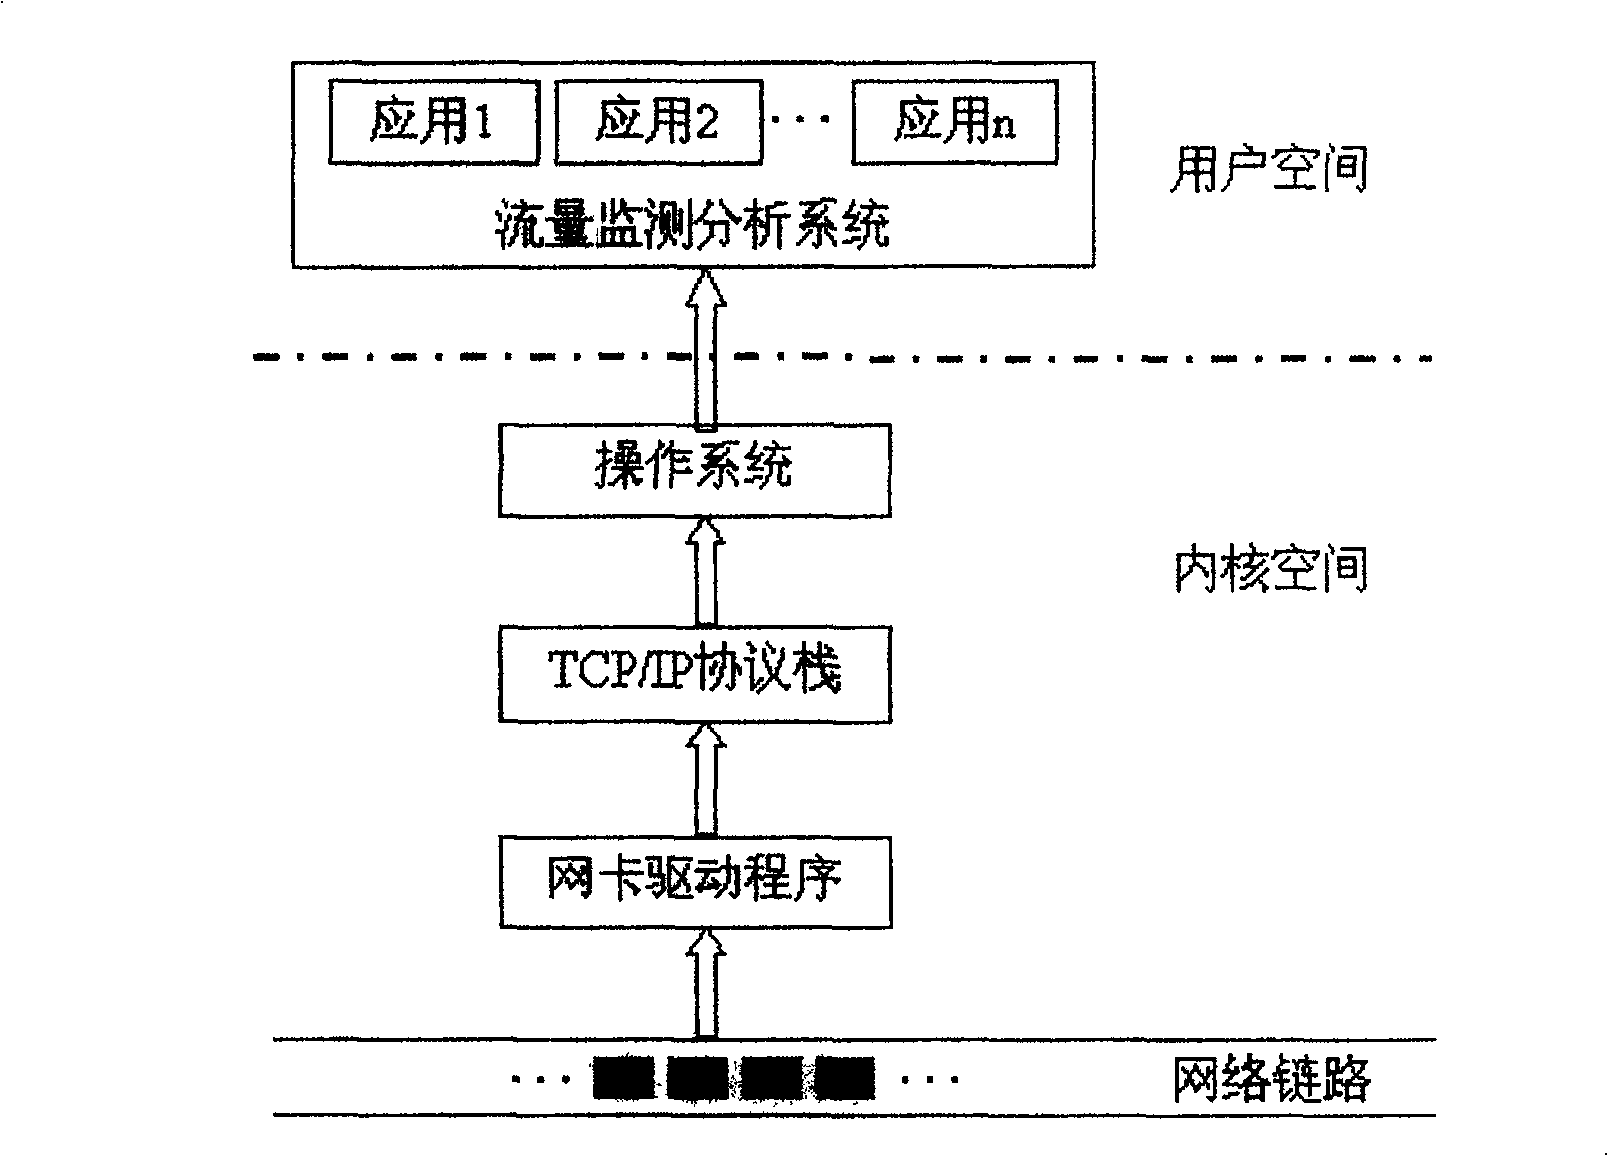 Method for realizing data packet catching based on sharing internal memory